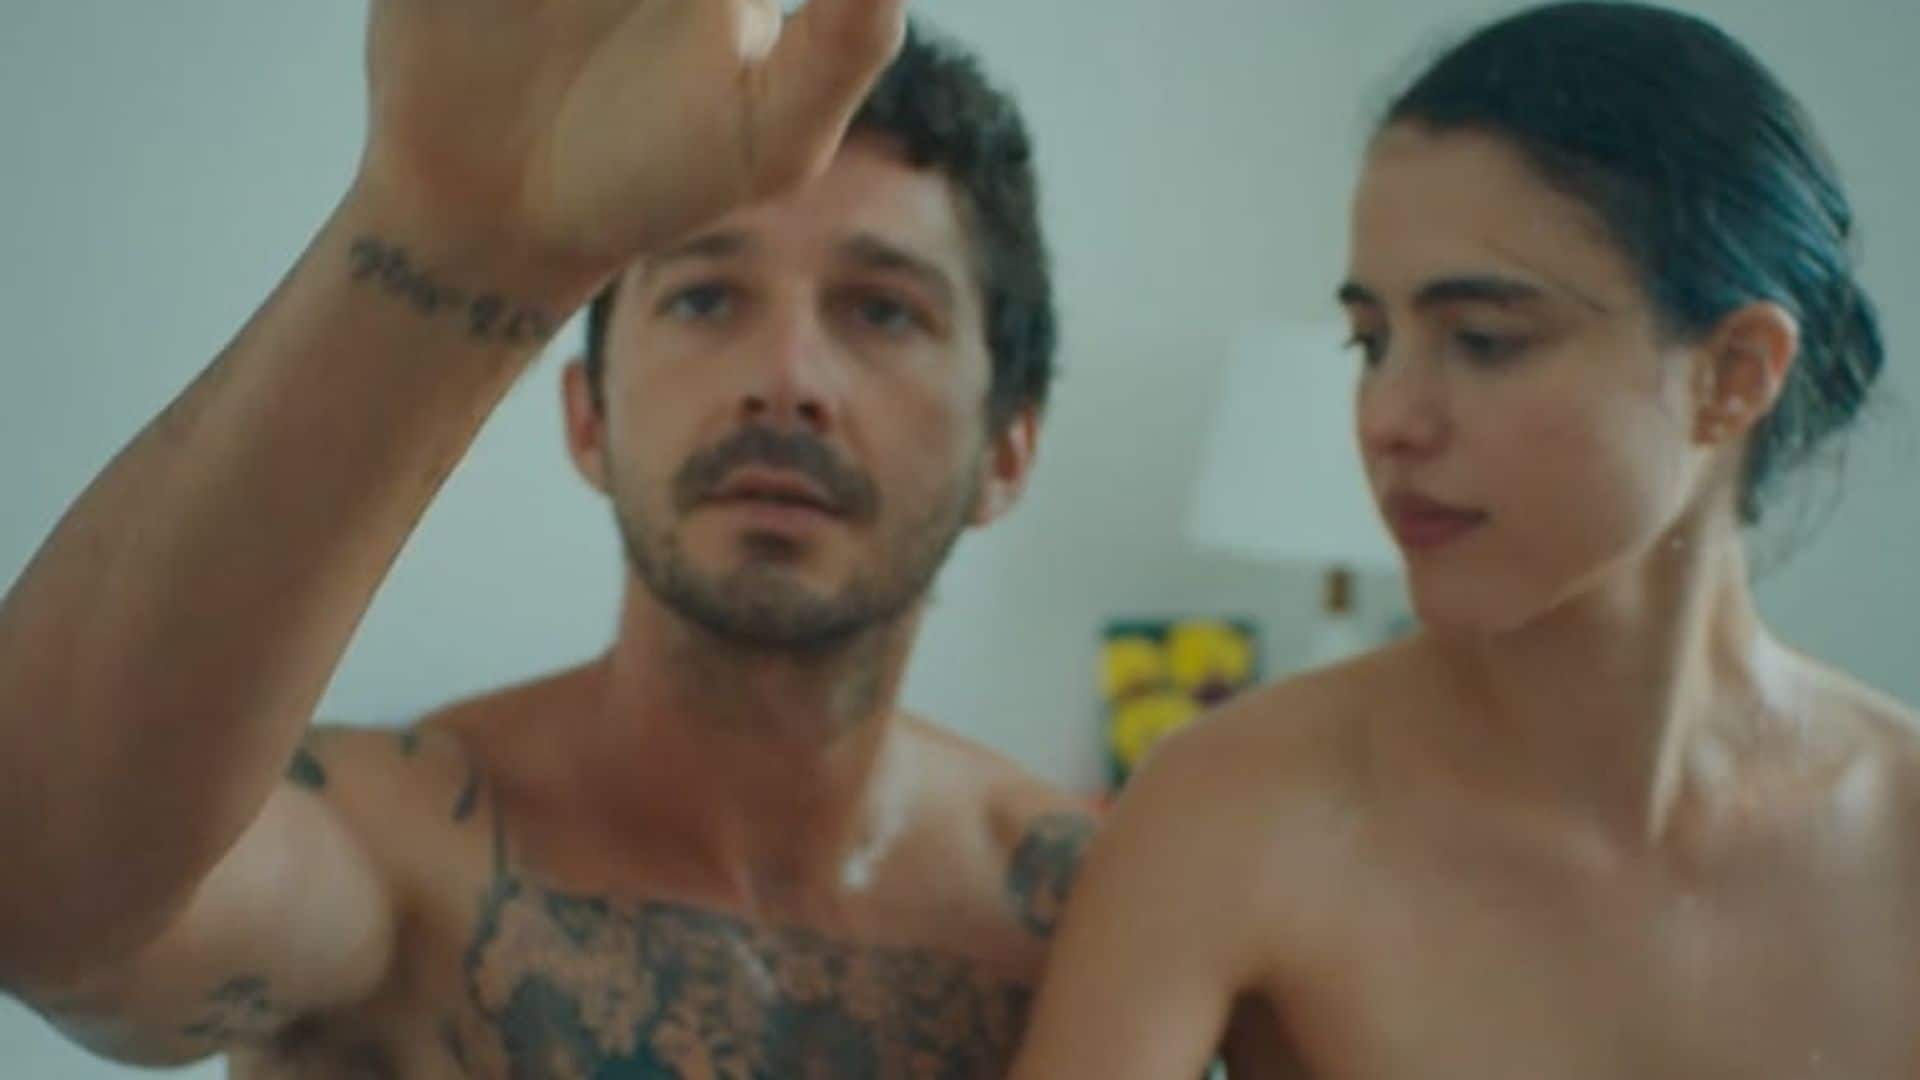 Shia LaBeouf and Margaret Qualley go fully nude in moving new short film